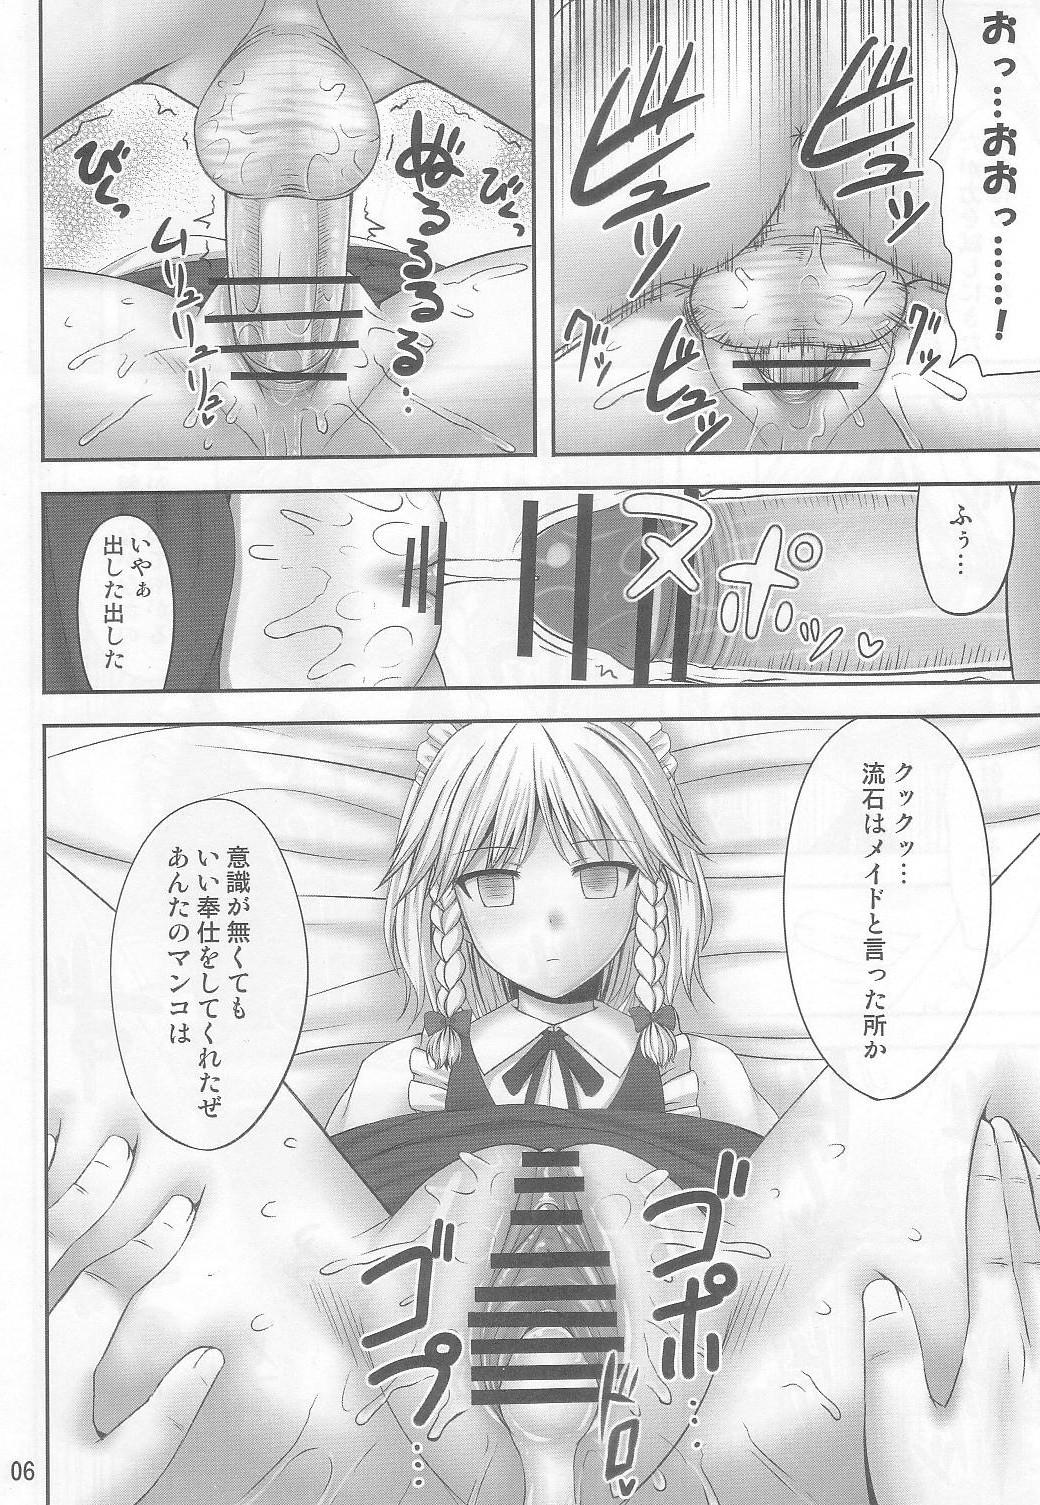 Que Gensou Saimin 2 - Touhou project Watersports - Page 6